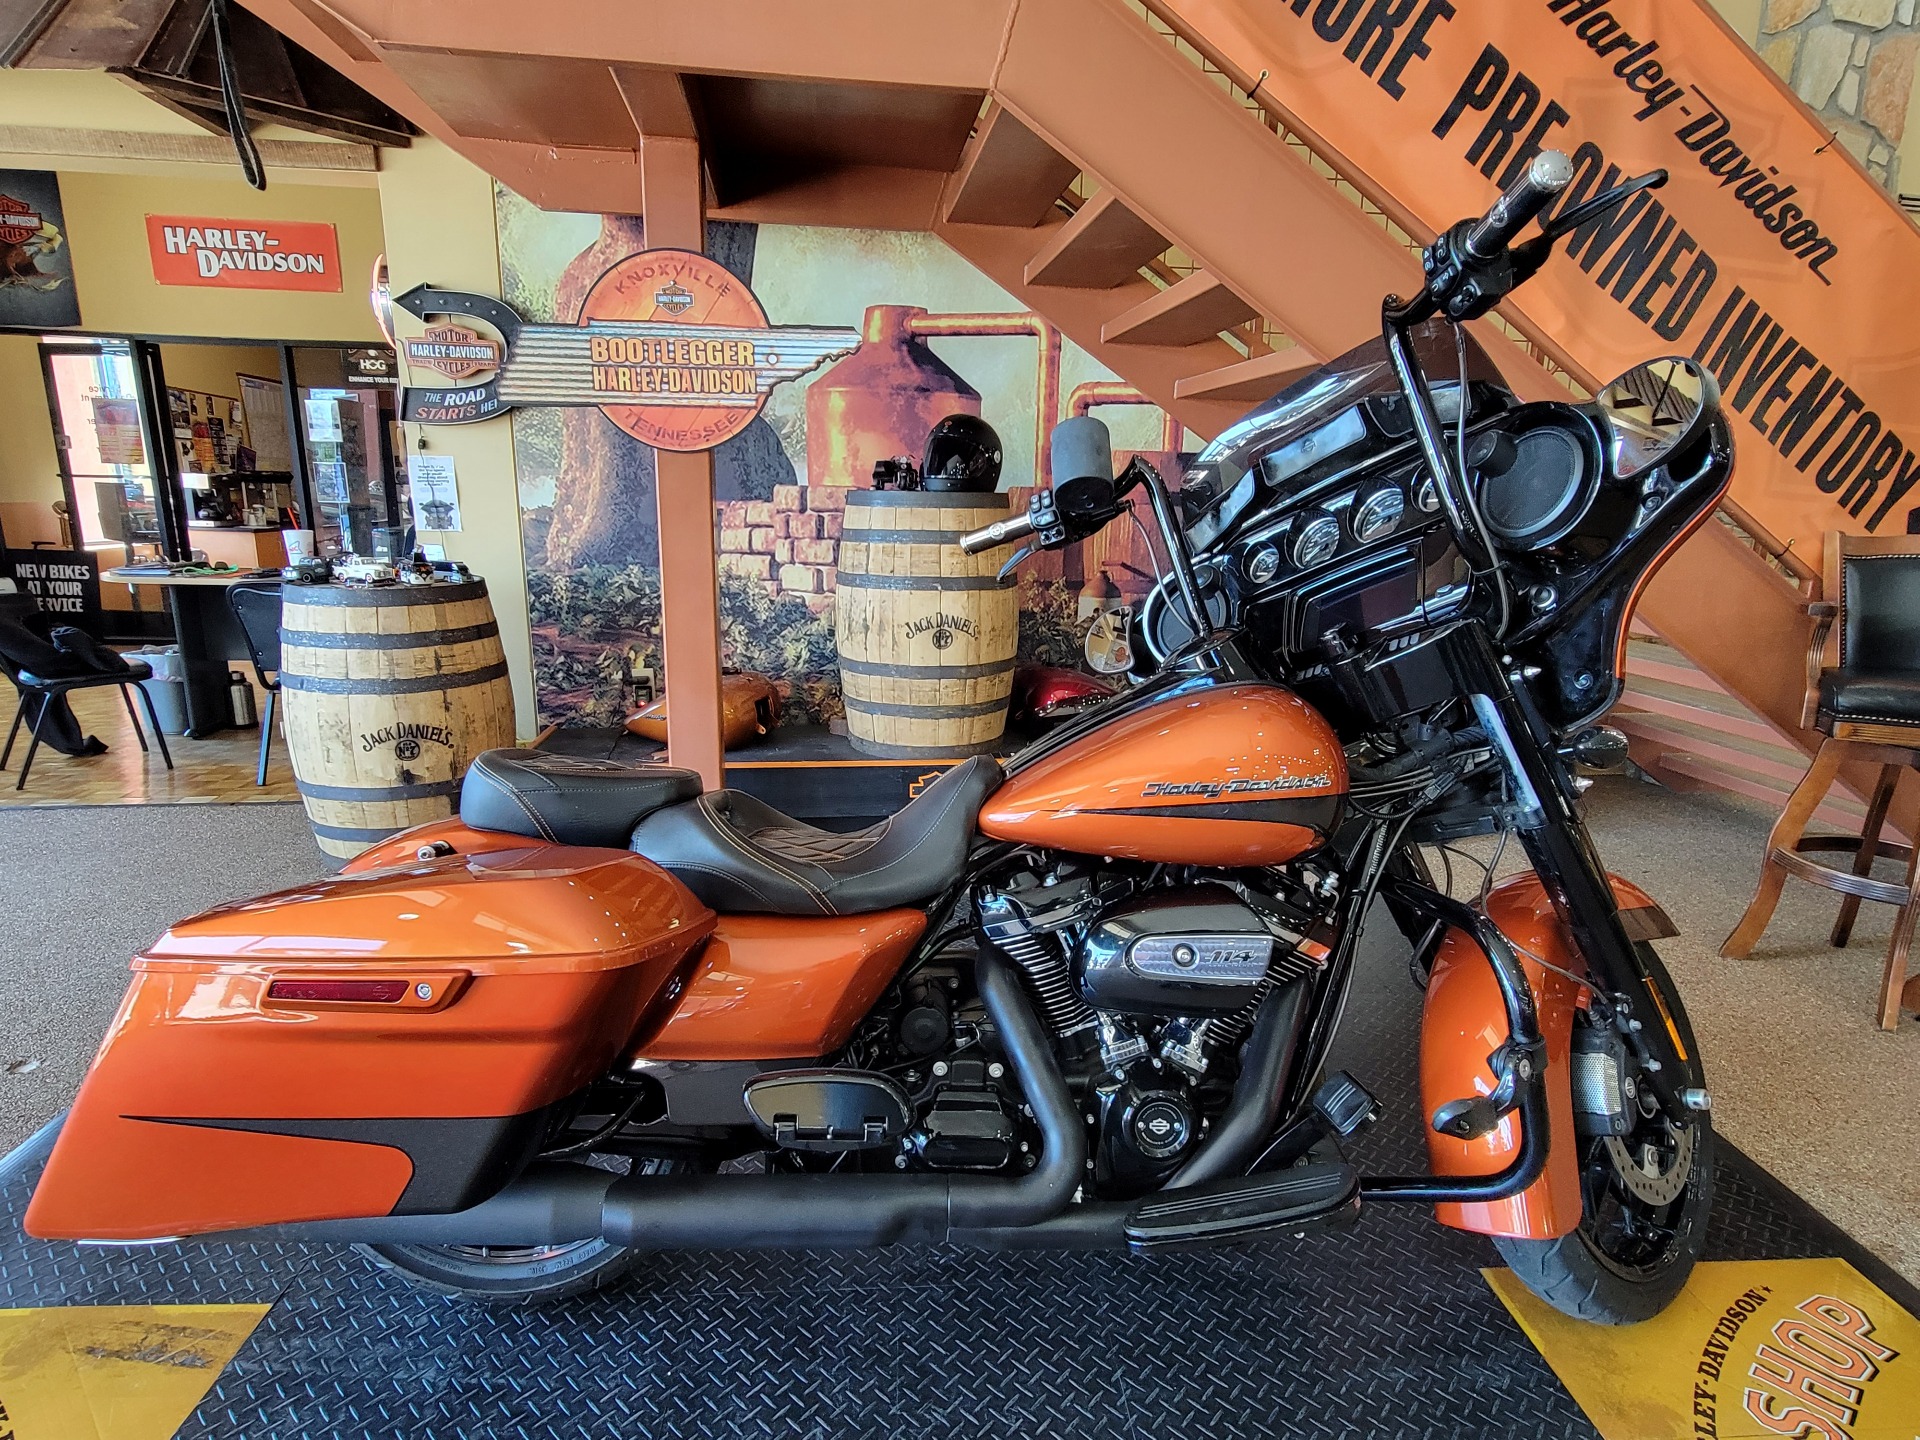 2020 Harley-Davidson Street Glide® Special in Knoxville, Tennessee - Photo 1